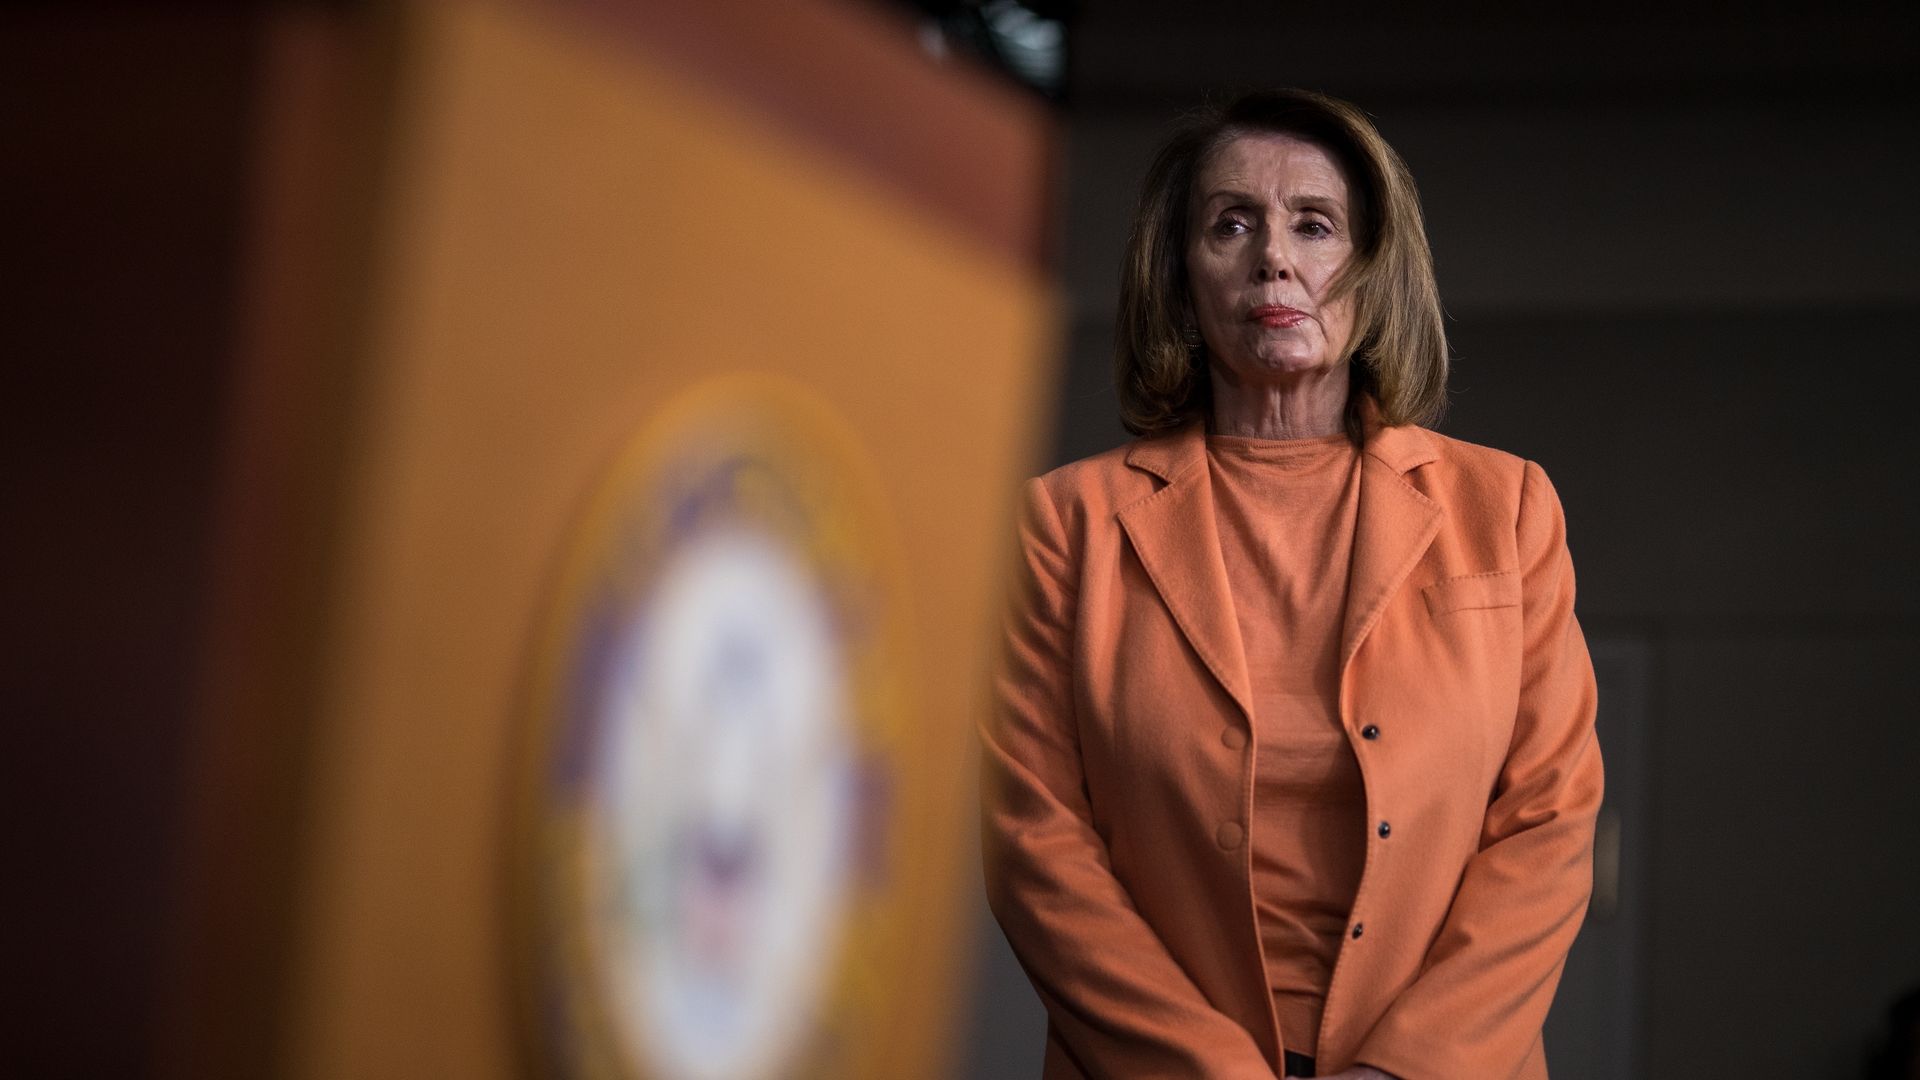 Nancy Pelosi standing next to a podium in an orange suit.